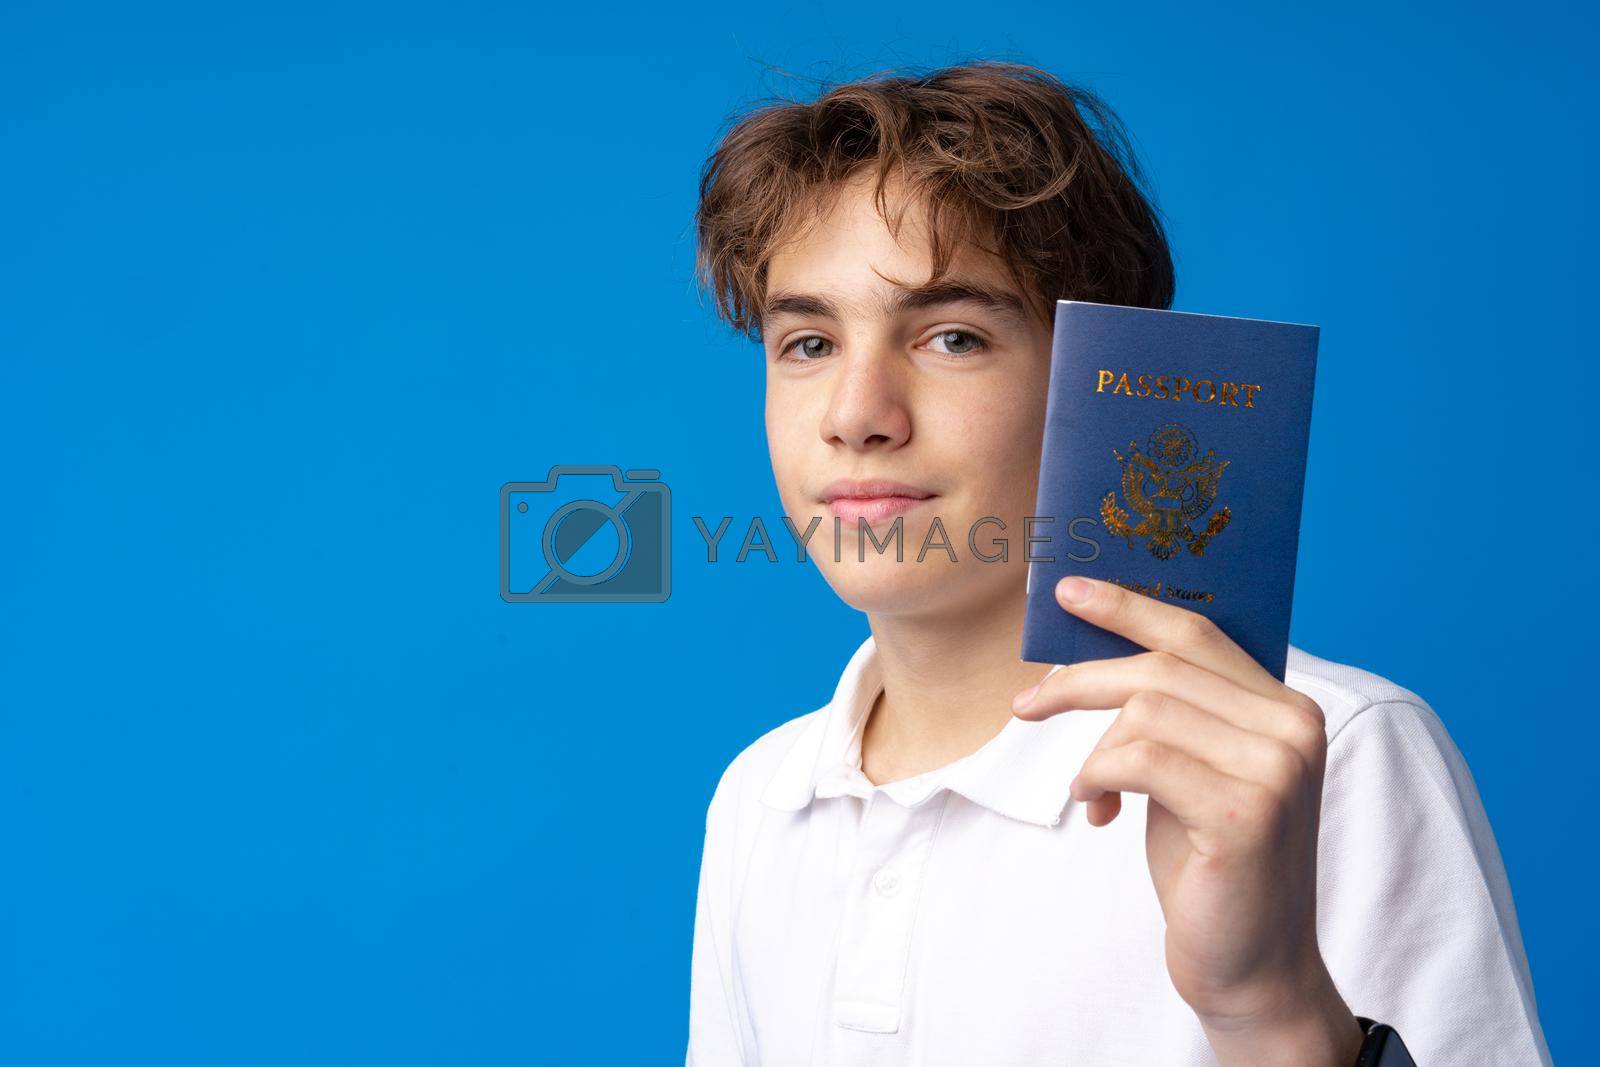 Royalty free image of Portrait of glad handsome boy showing his passport going on vacation against blue background by Fabrikasimf